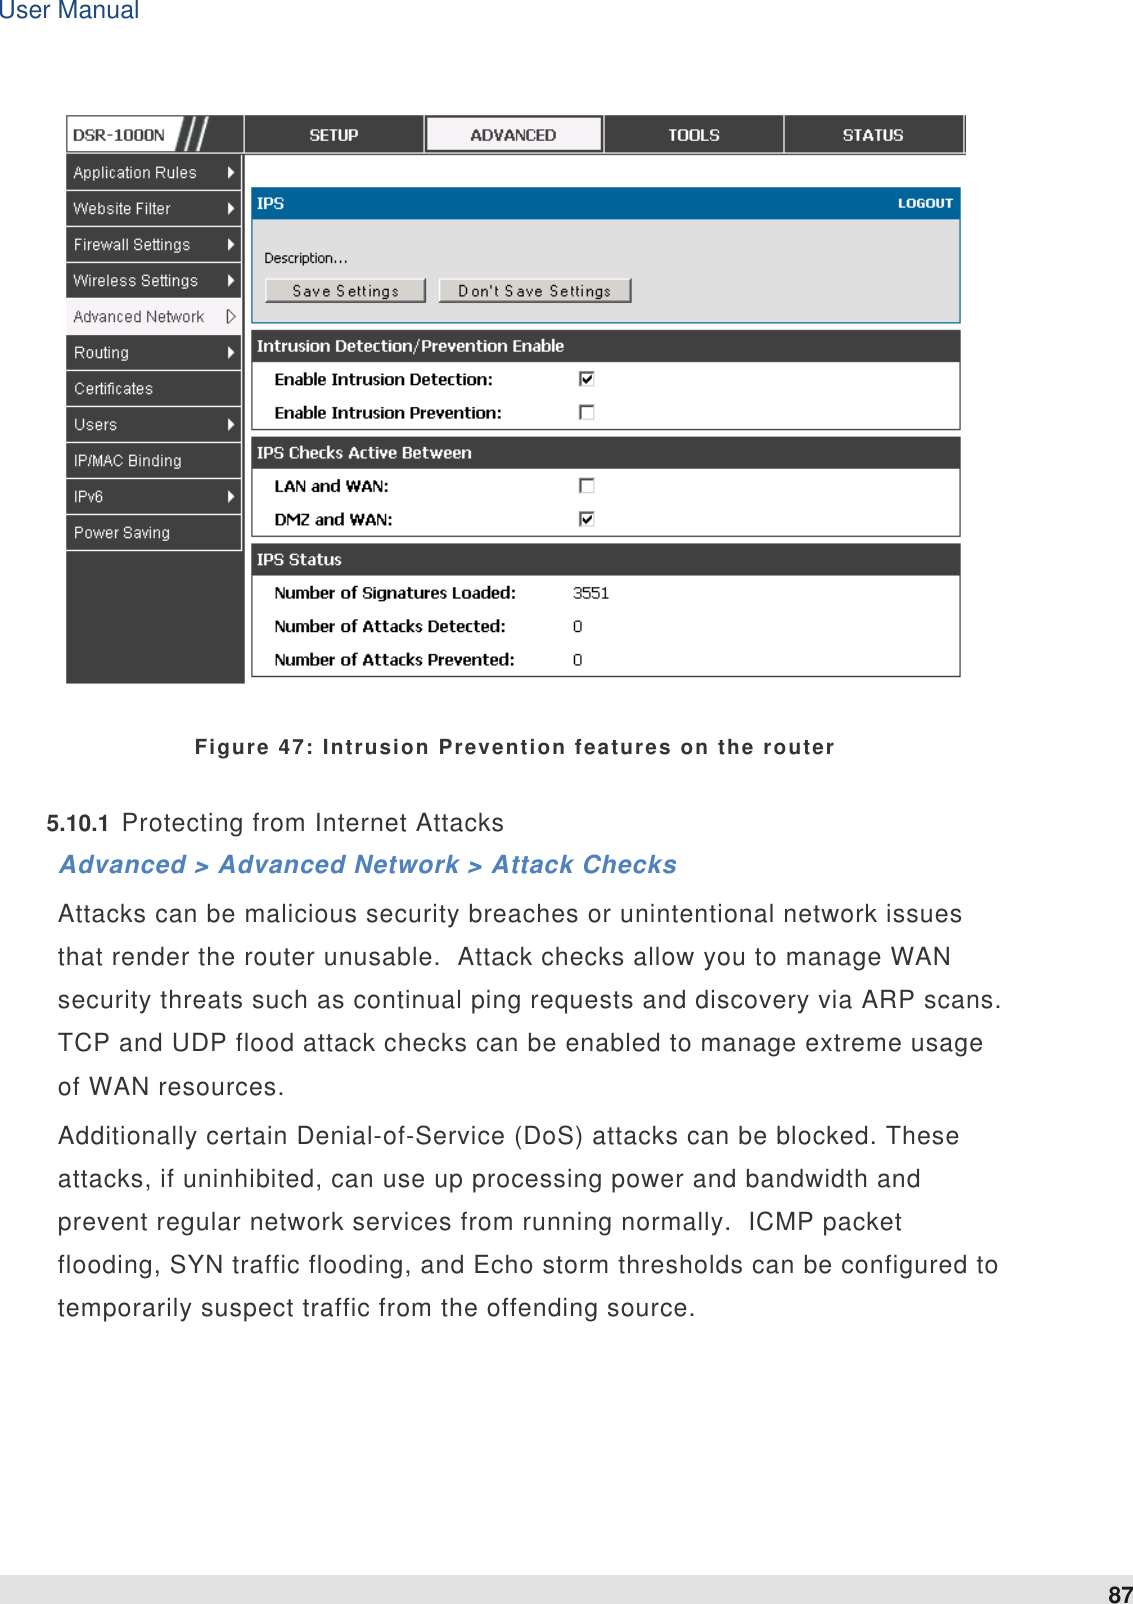 User Manual 87    Figure 47: Intrusion Prevention features on the router   5.10.1  Protecting from Internet Attacks Advanced &gt; Advanced Network &gt; Attack Checks Attacks can be malicious security breaches or unintentional network issues that render the router unusable.  Attack checks allow you to manage WAN security threats such as continual ping requests and discovery via ARP scans.  TCP and UDP flood attack checks can be enabled to manage extreme usage of WAN resources.   Additionally certain Denial-of-Service (DoS) attacks can be blocked. These attacks, if uninhibited, can use up processing power and bandwidth and prevent regular network services from running normally.  ICMP packet flooding, SYN traffic flooding, and Echo storm thresholds can be configured to temporarily suspect traffic from the offending source.    